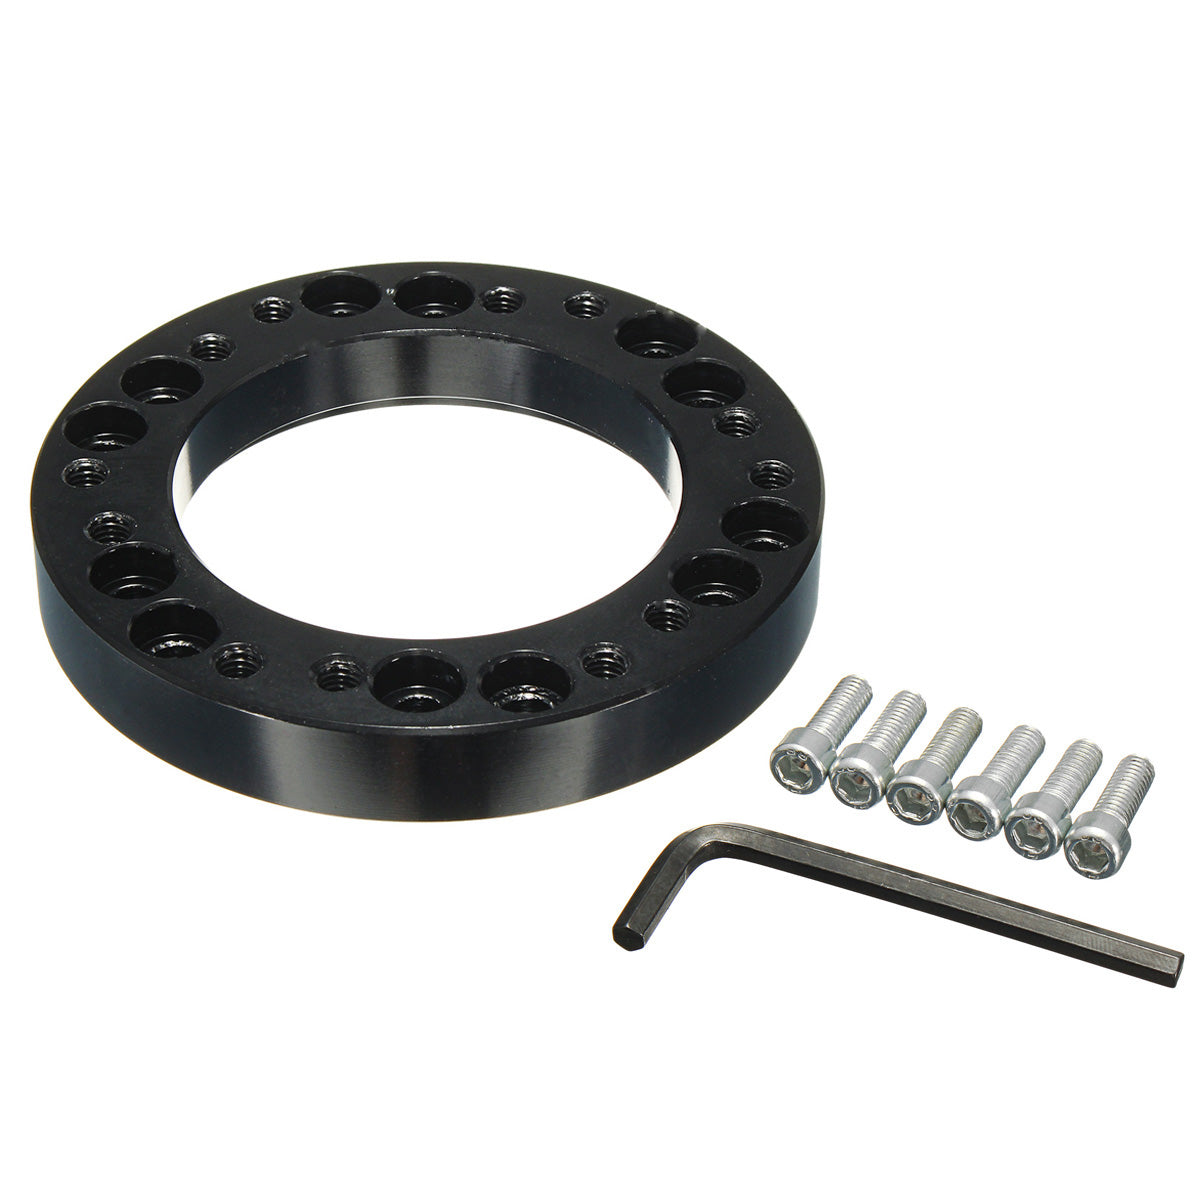 Black Steel Ring Wheel Hub Adapter Spacer Kit For NARDI PERSONAL SPARCO OMP MOMO - Auto GoShop